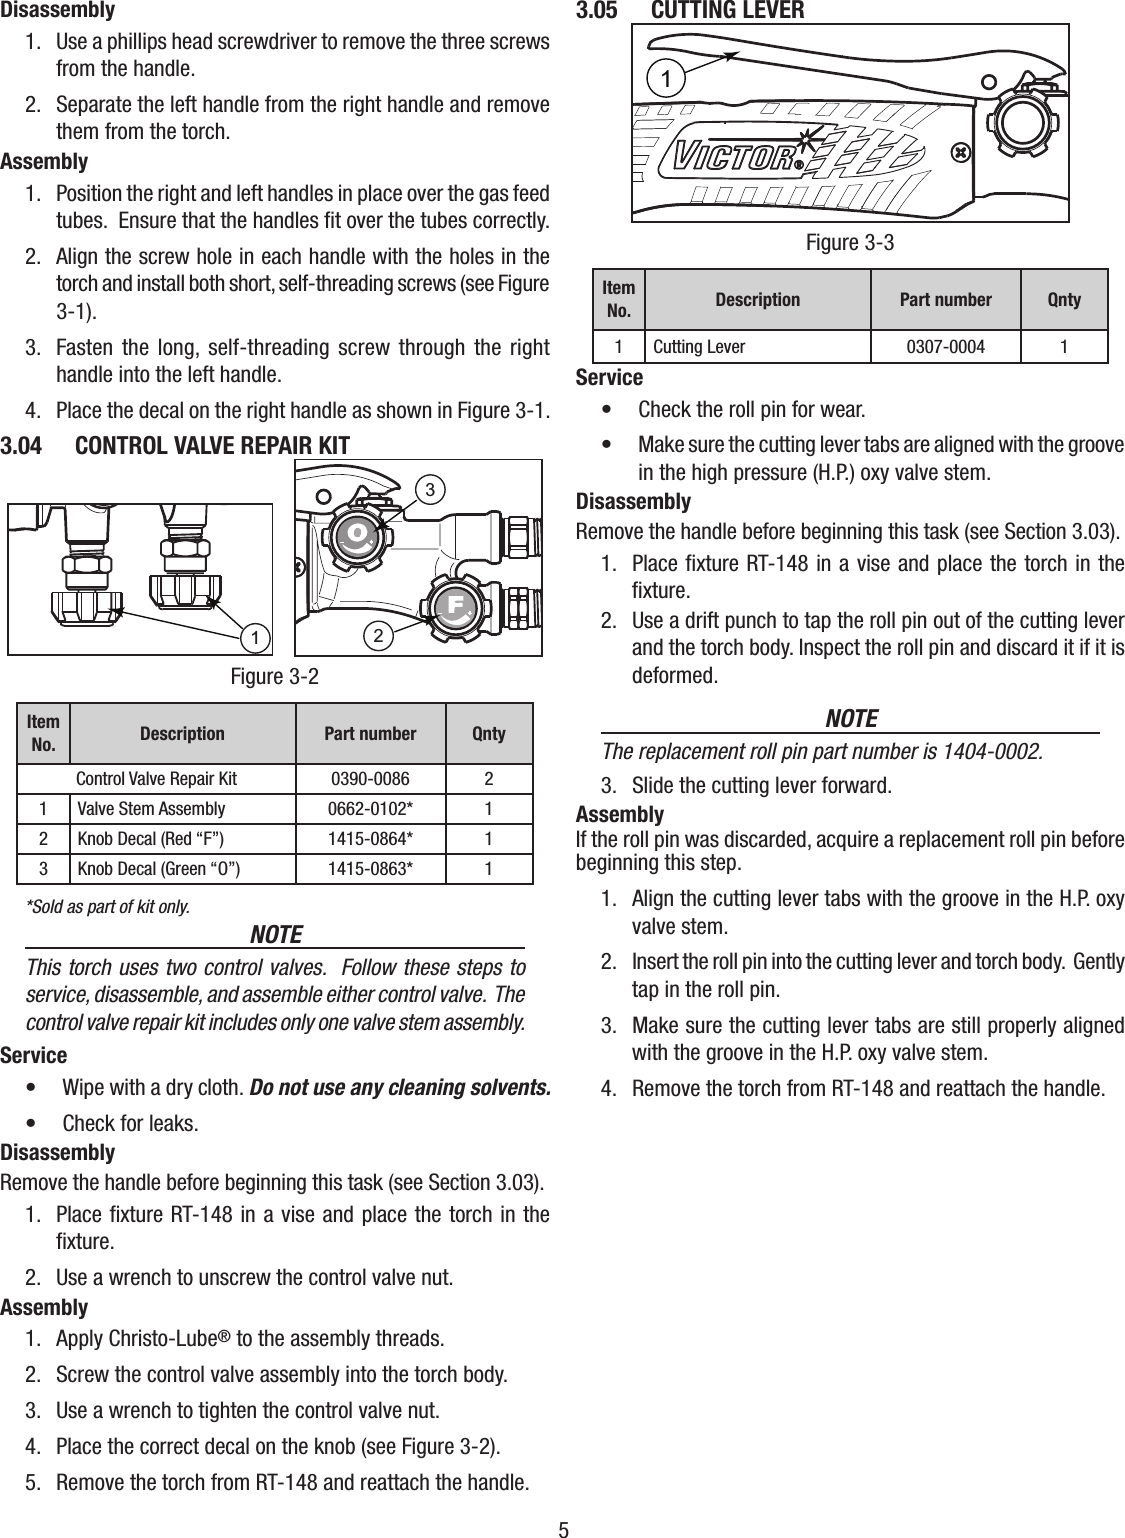 Page 5 of 12 - Victor-ST411C-1A-Acetylene-Torch-Manual